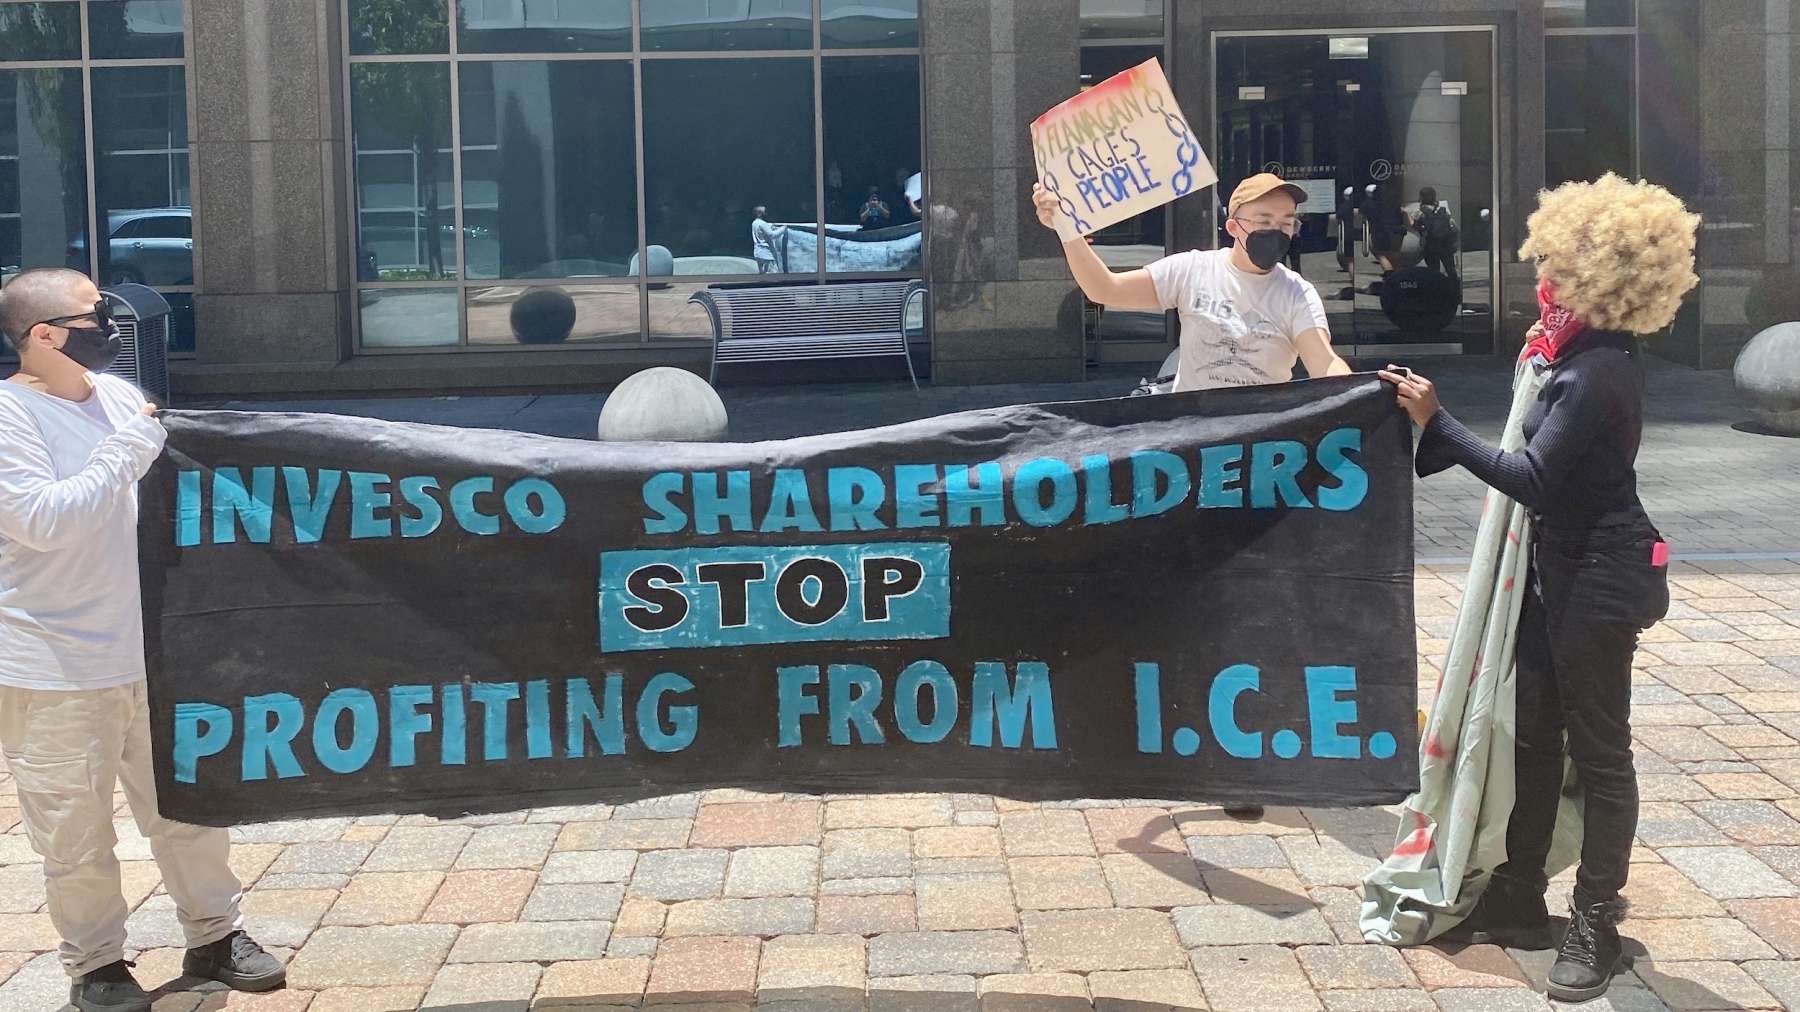 Rhode Island News: AMOR and FANG disrupt Invesco shareholder meeting, arrests made